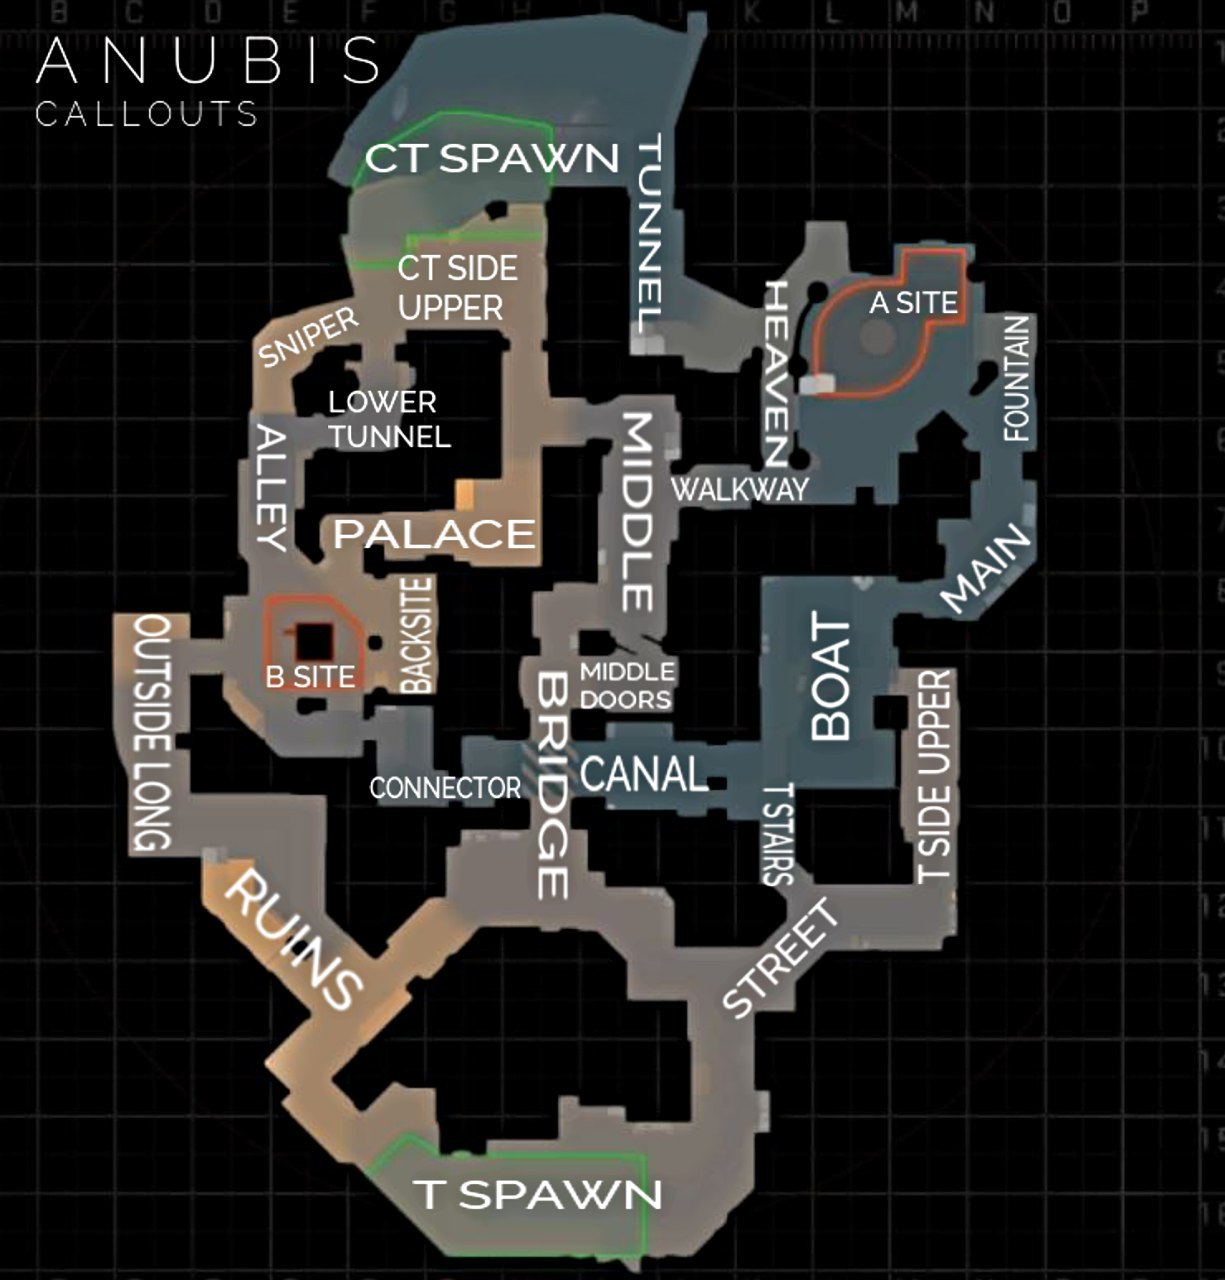 Names of positions on Anubis